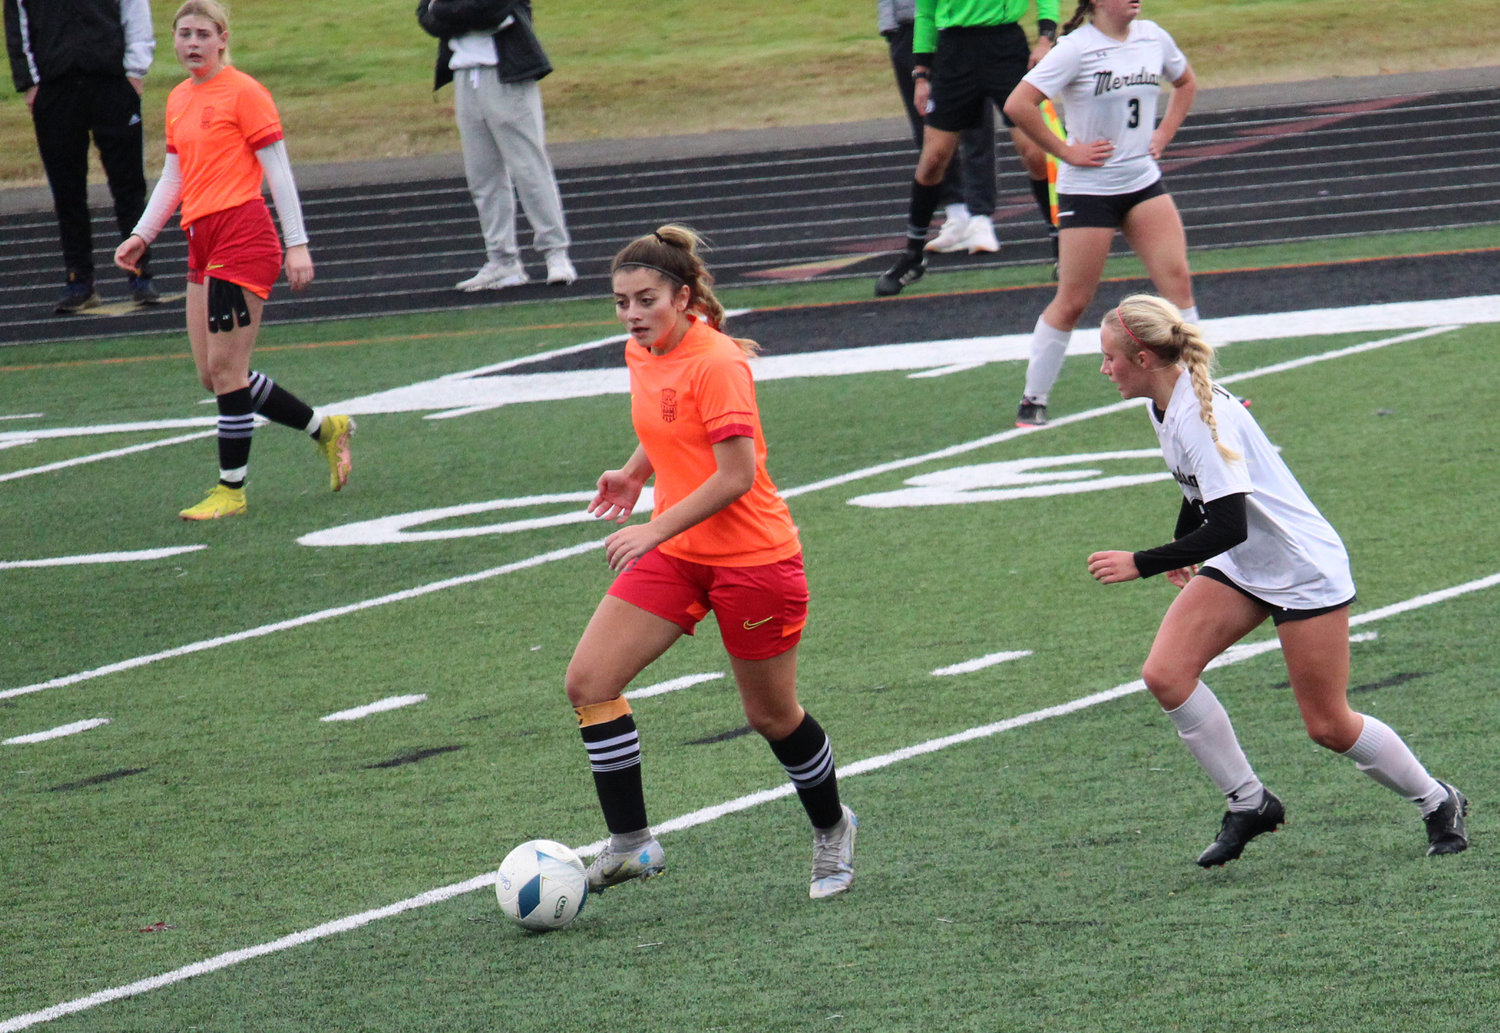 Blaine senior Kristina Roby with the ball during a 1-0 loss to Meridian on October 29.